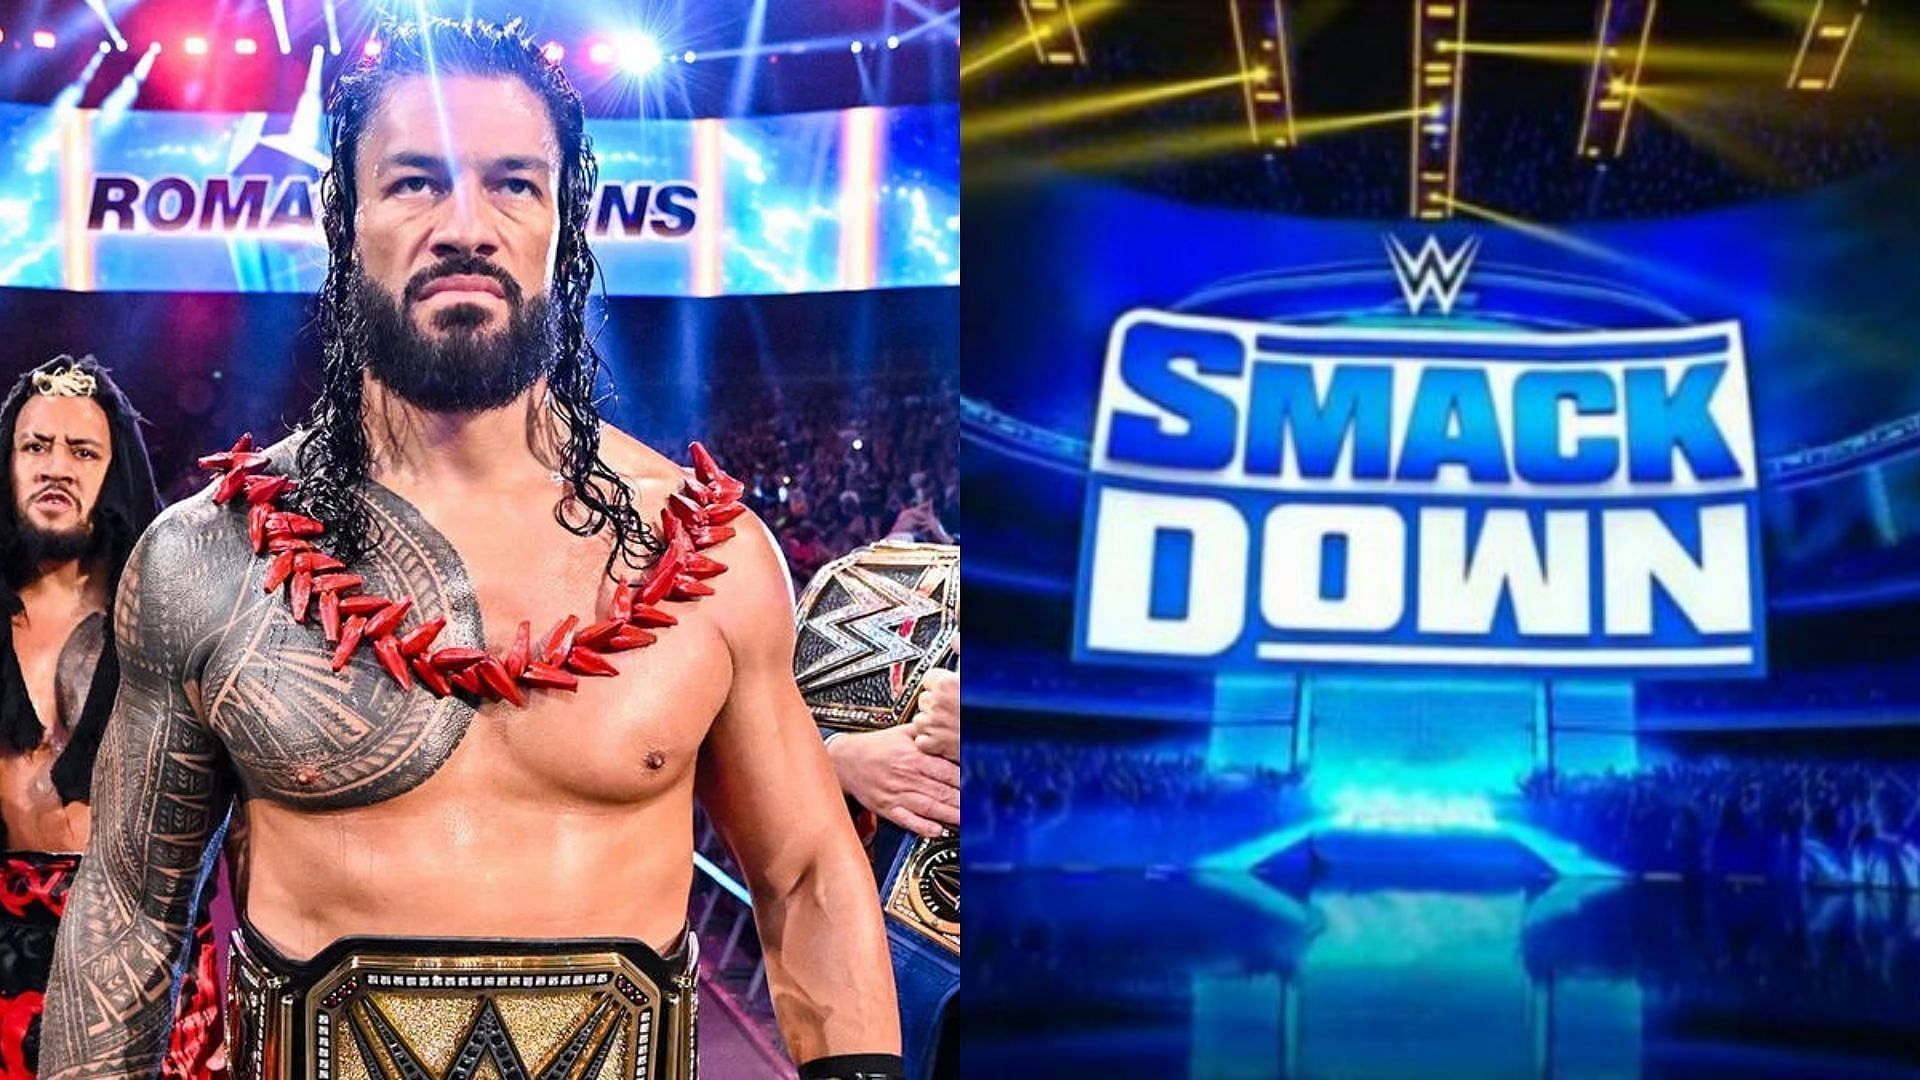 Roman Reigns is scheduled to return tonight on SmackDown